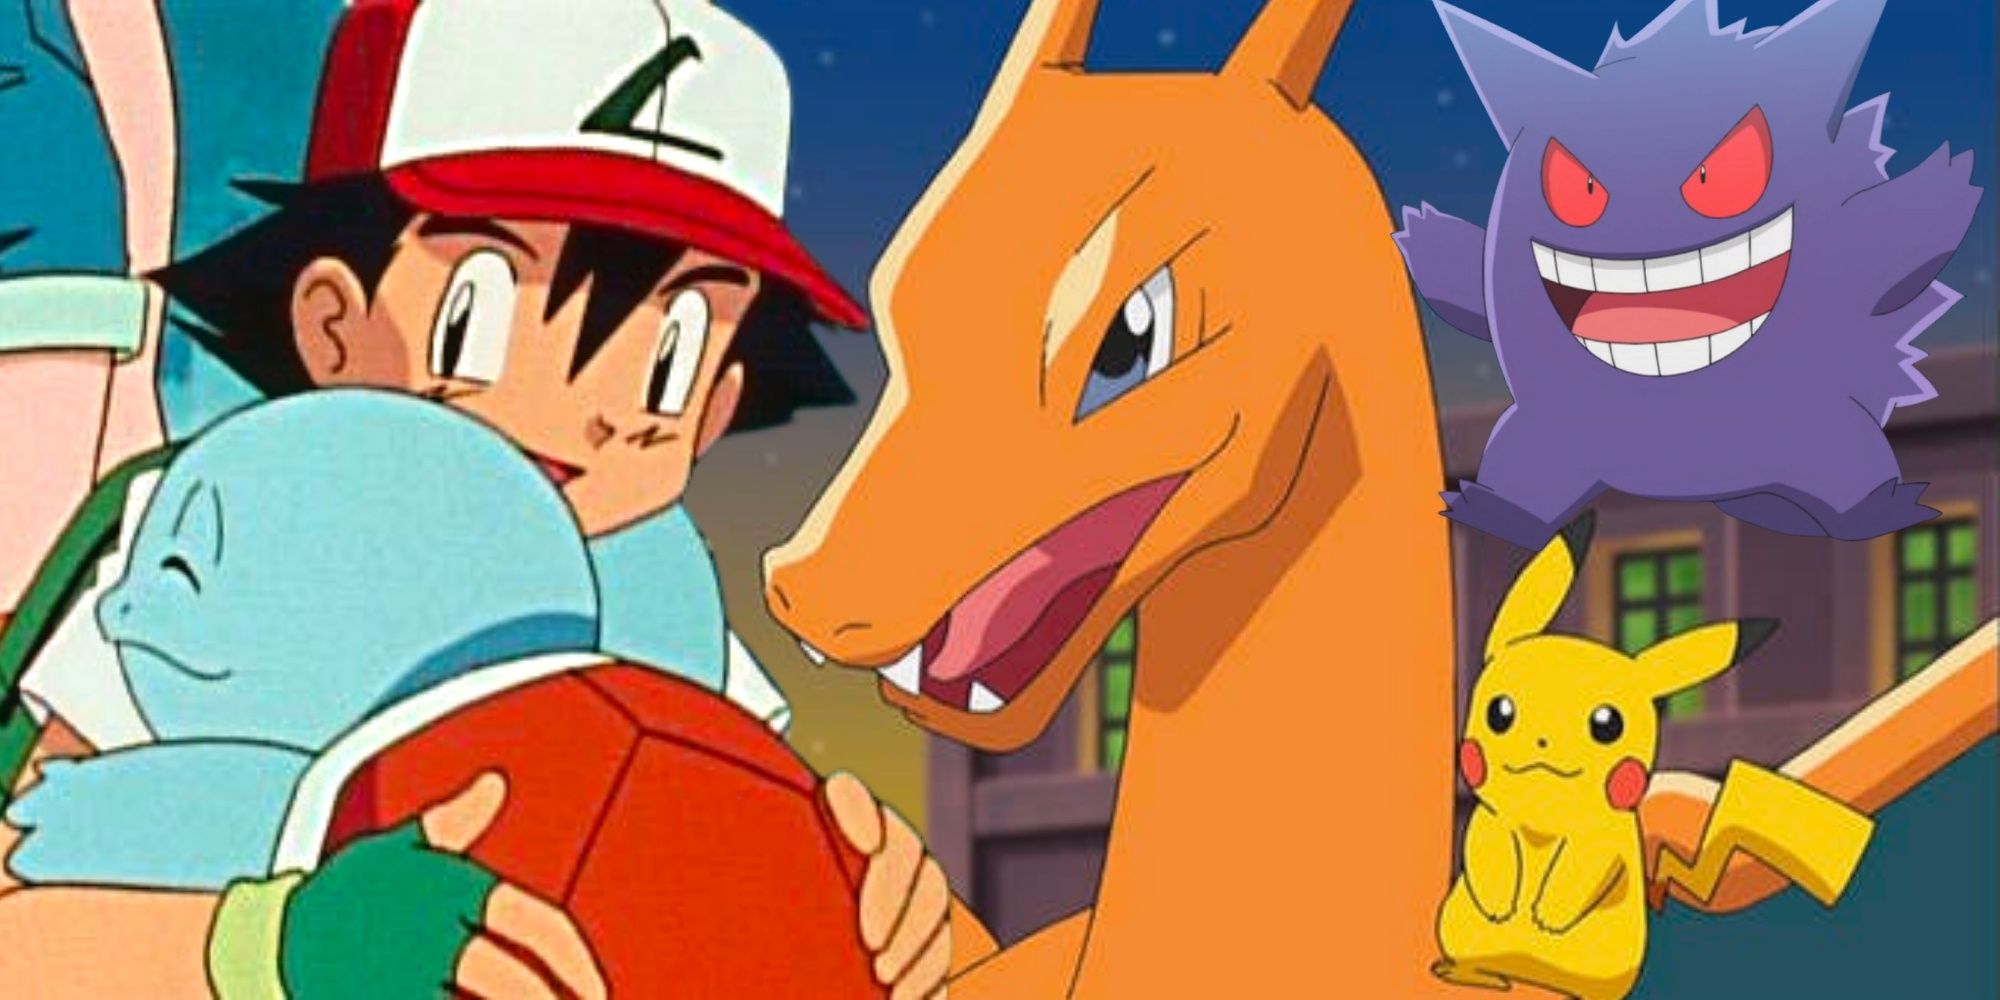 Ash and Squirtle hugging, Charizard with Pikachu on it's shoulder, Genger of Nintendo Game and Anime Pokemon